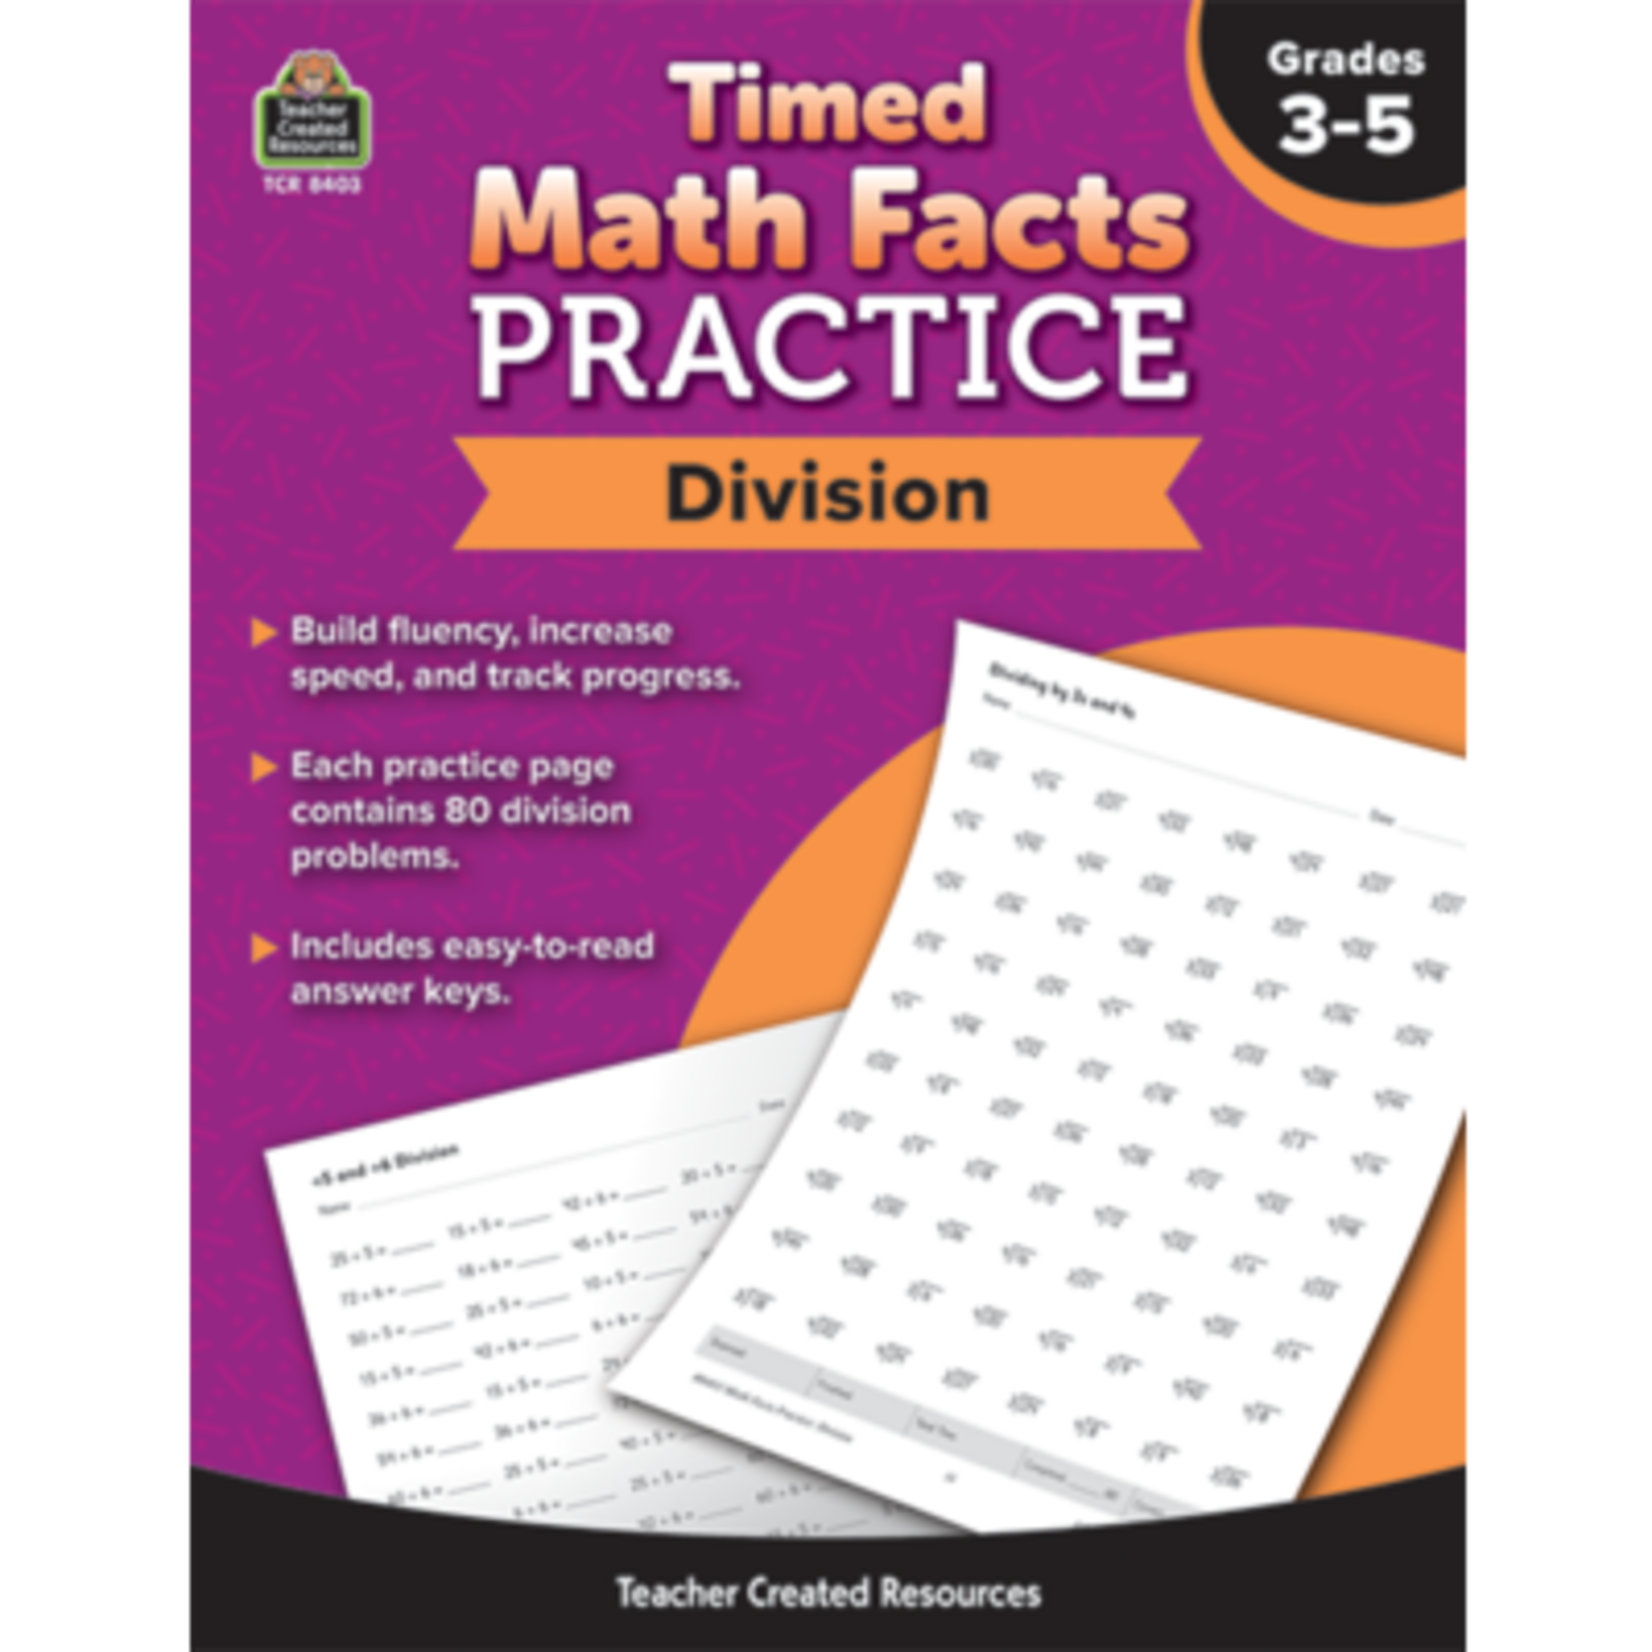 TEACHER CREATED RESOURCES Timed Math Facts Practice: Division